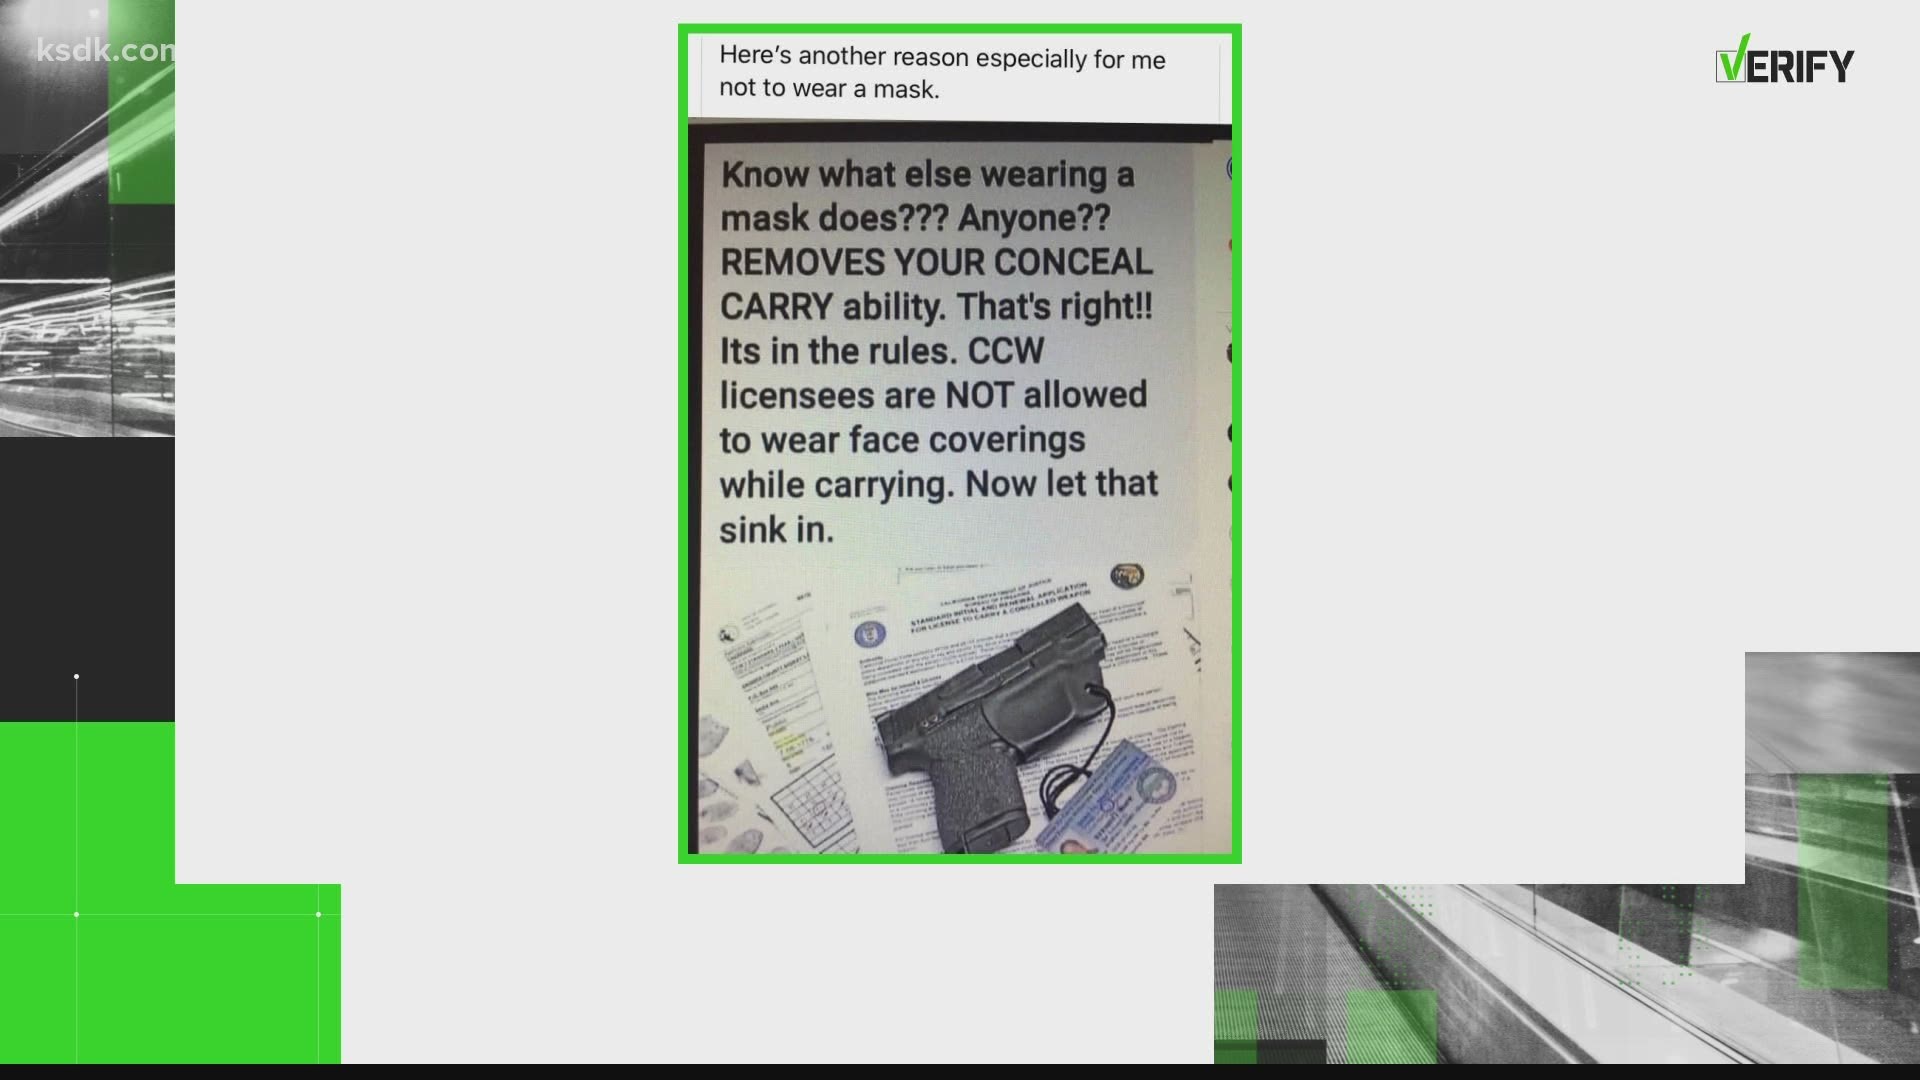 A post circulating on social media said people would not be allowed to carry a concealed weapon while wearing a mask. Our Verify team found that's not the case.